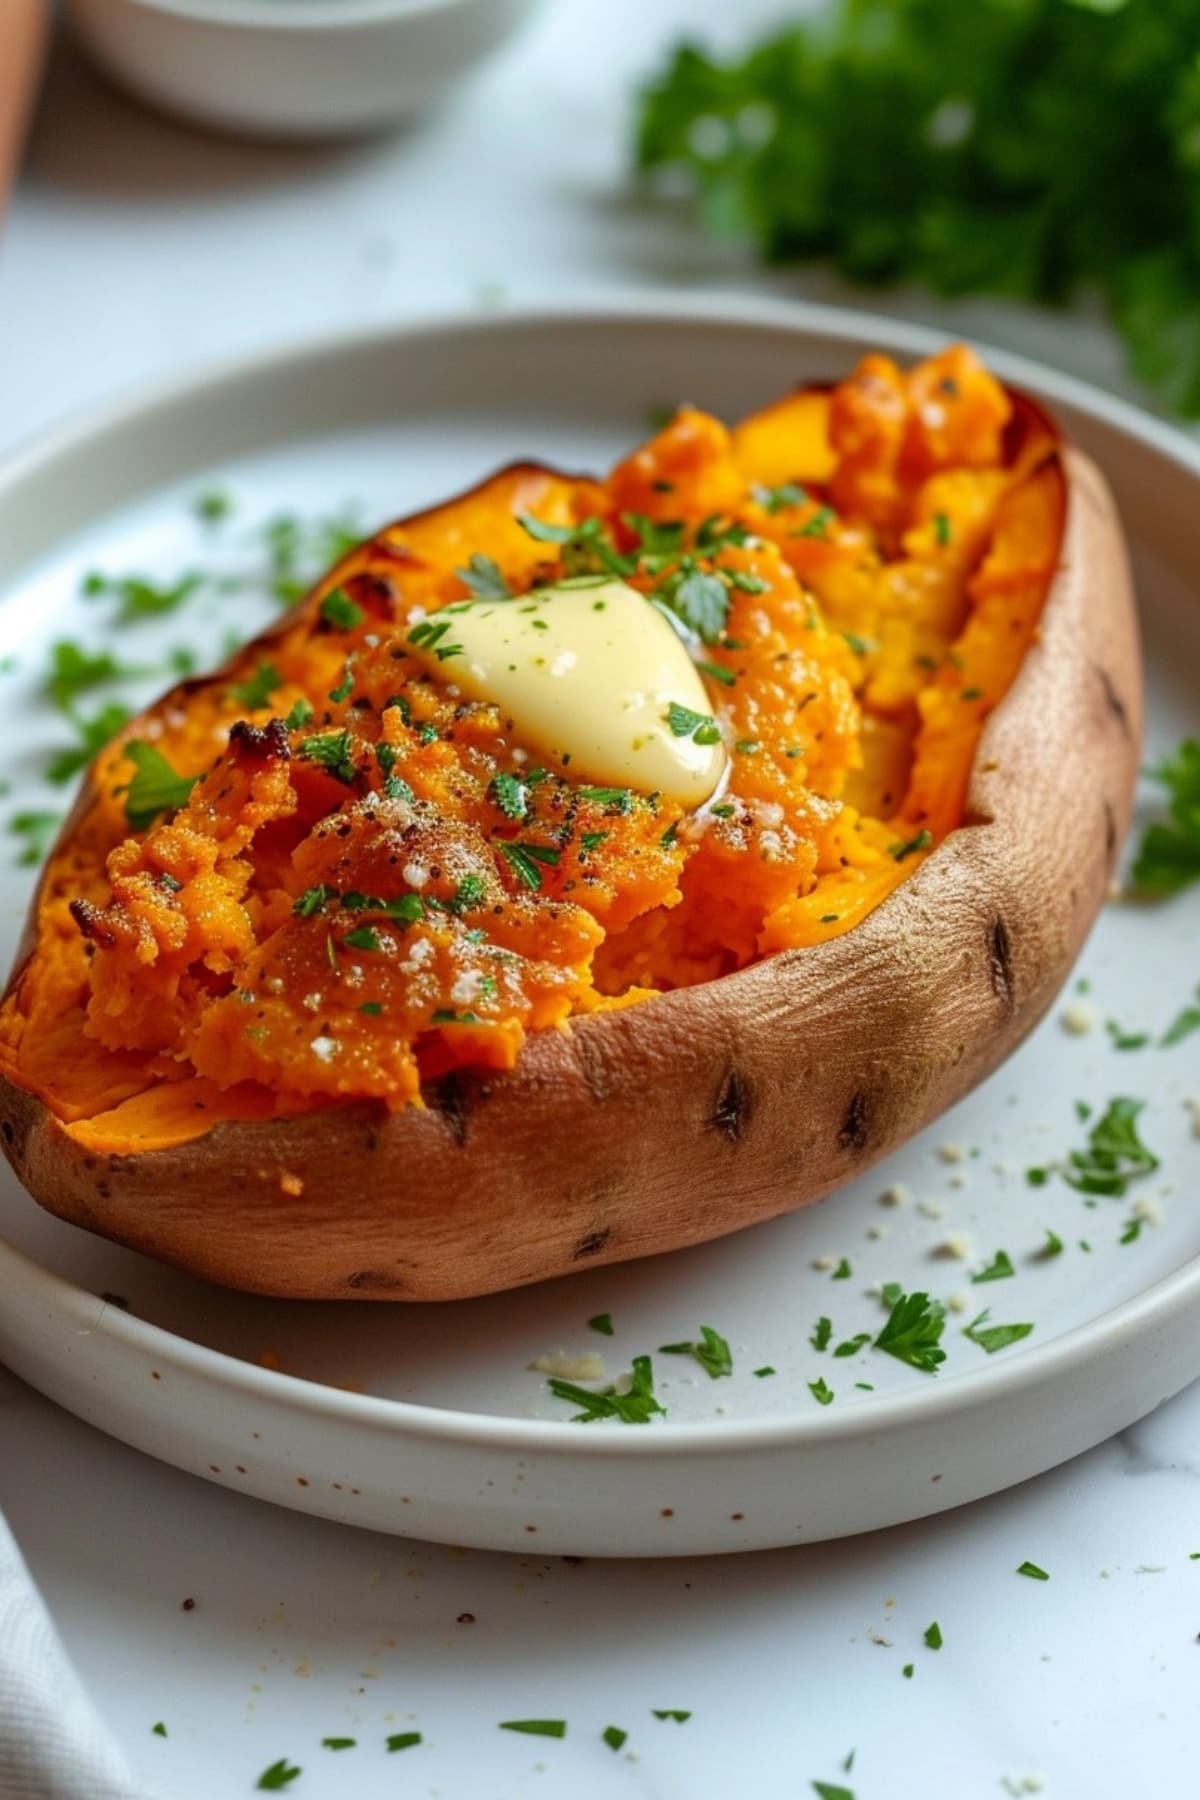 Baked sweet potato with butter on top